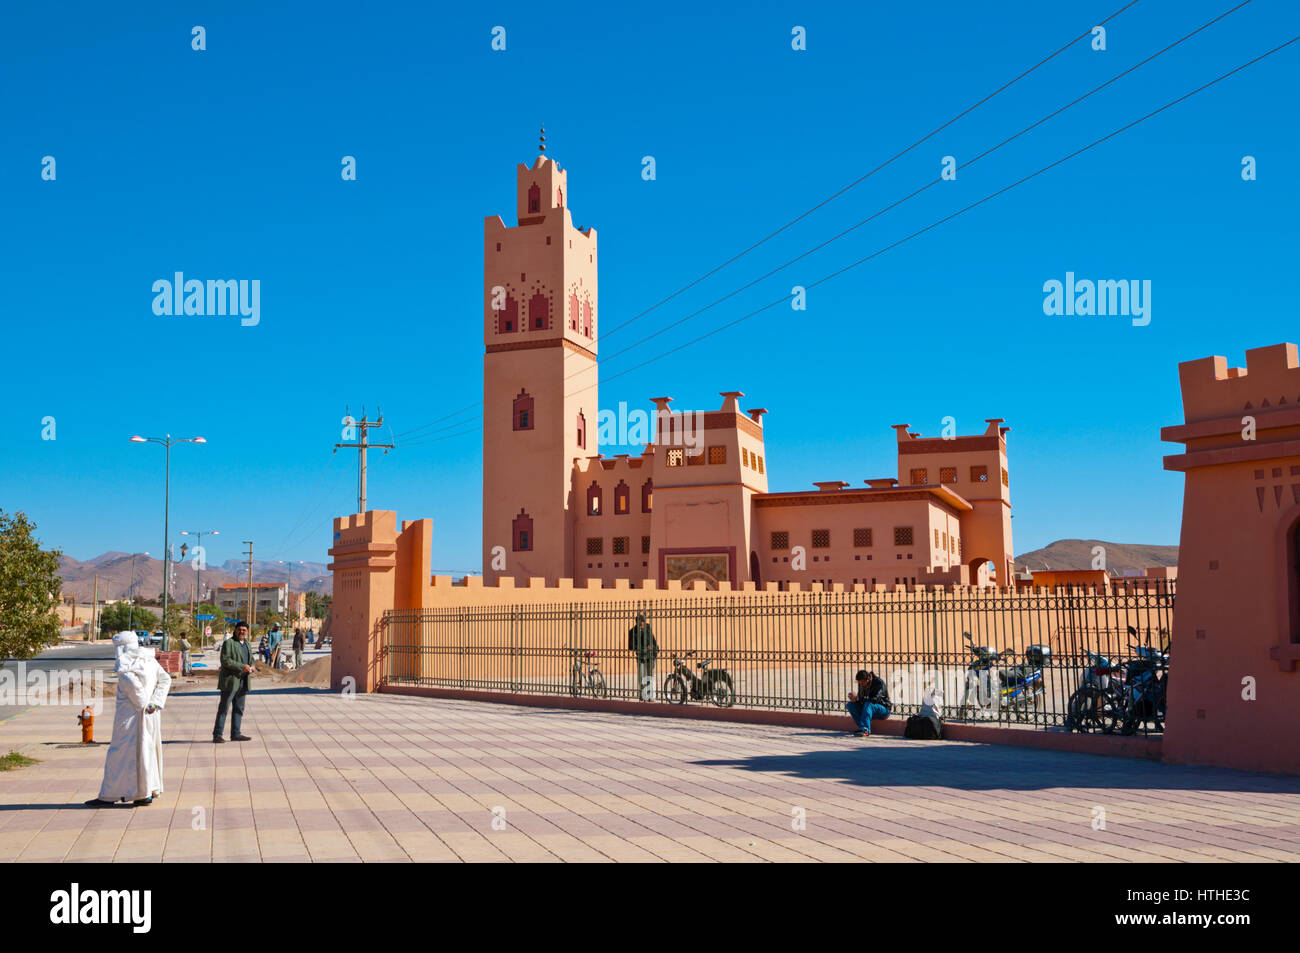 The new mosque, next to the bus station, Tata, Morocco Stock Photo